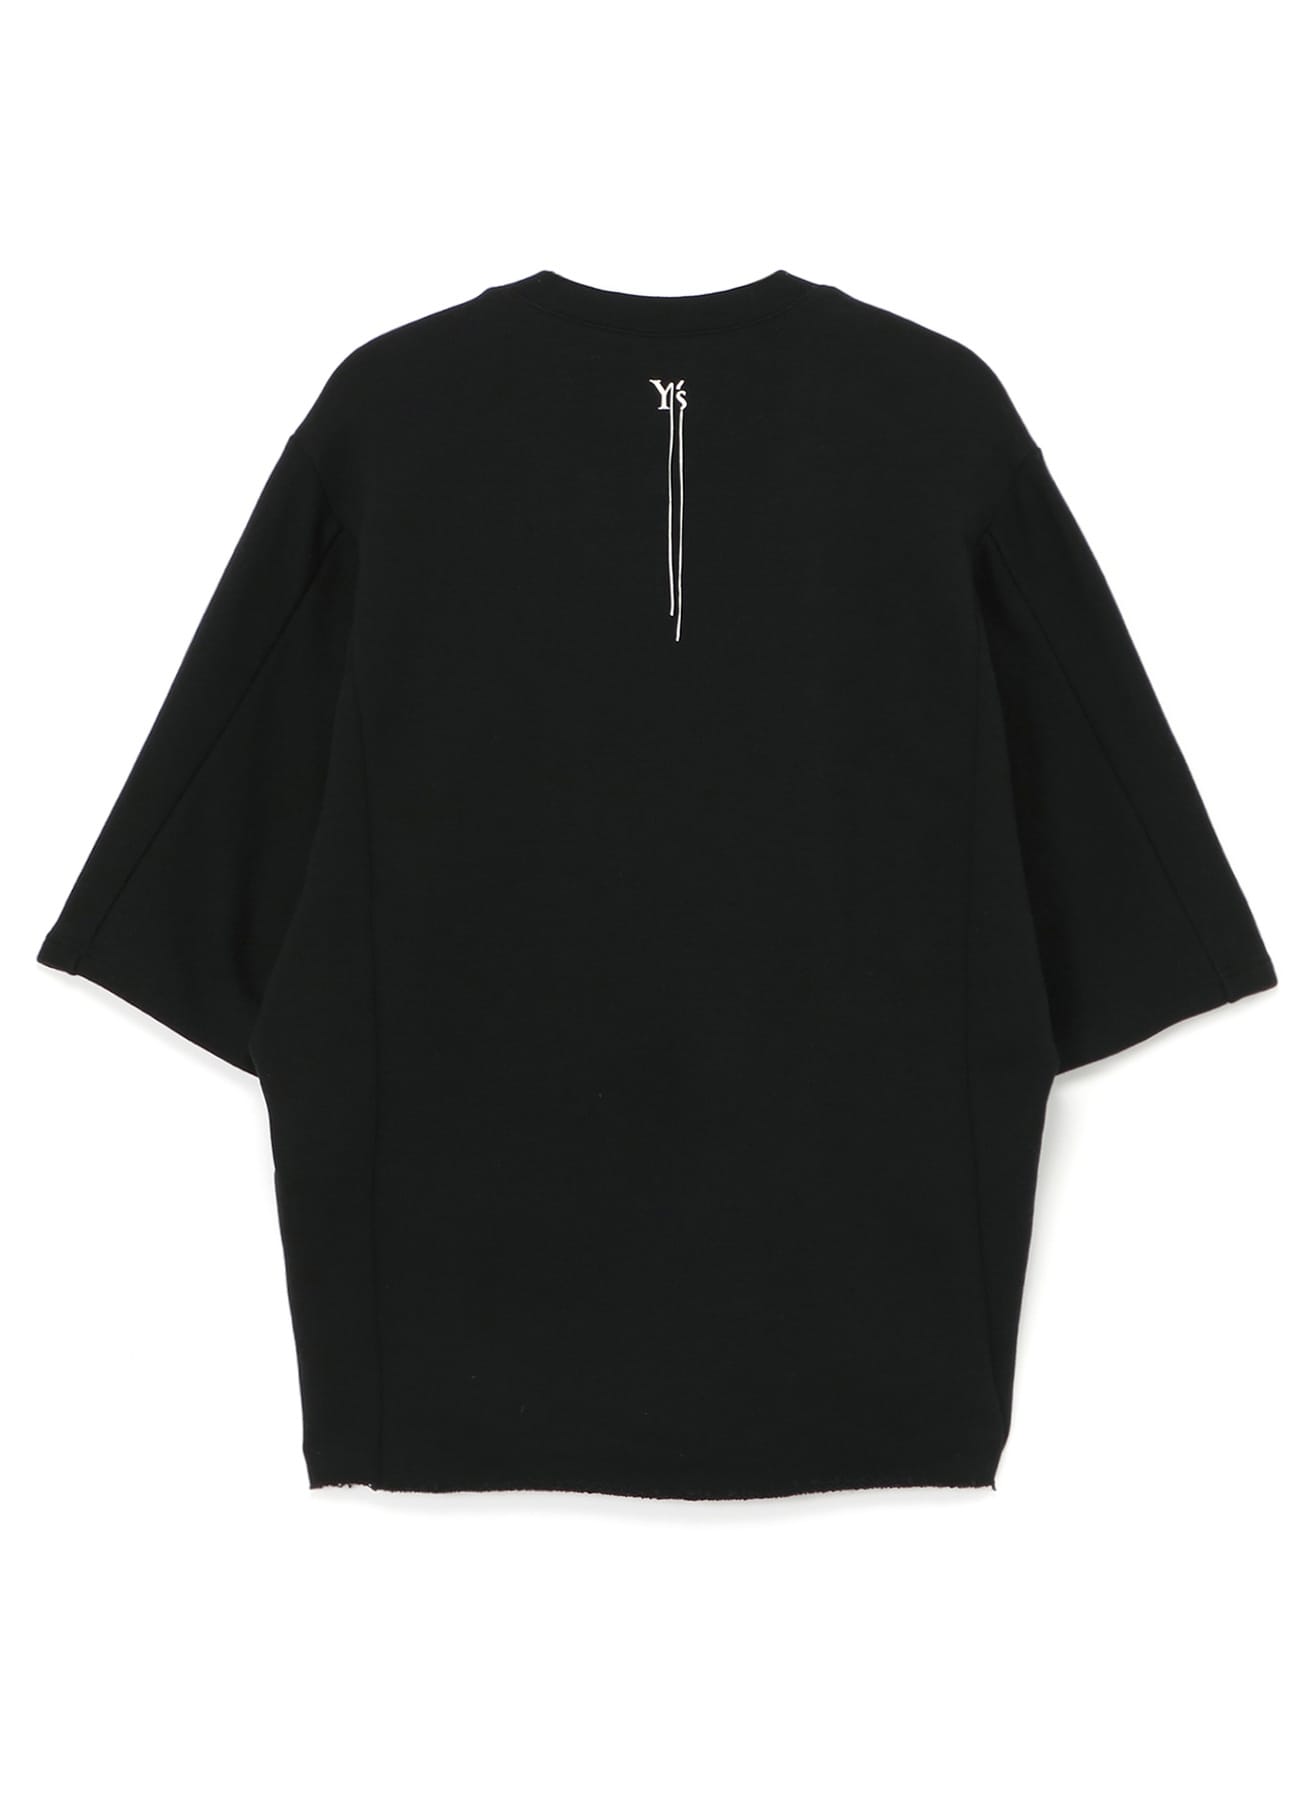 FRENCH TERRY Y'S LOGO EMBROIDERY OVERSIZED SWEATSHIRT(S Black 